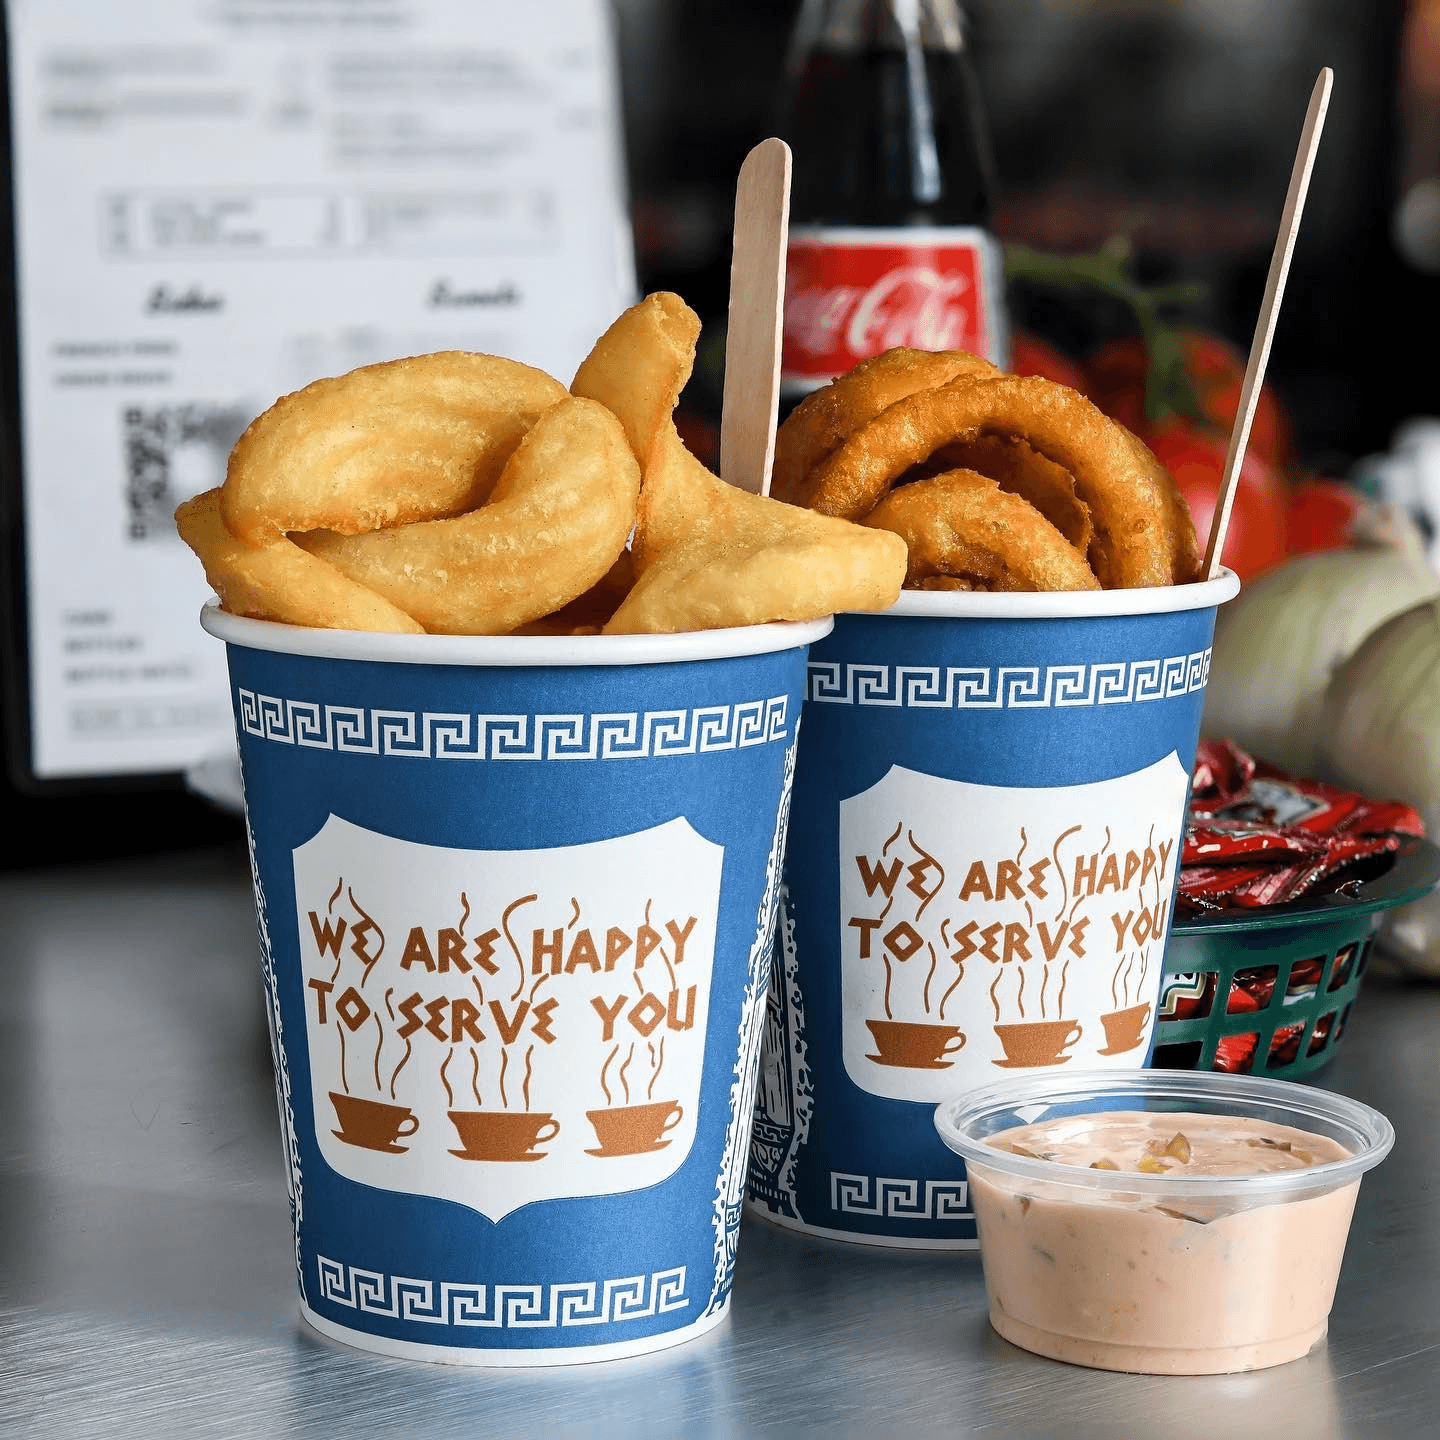 Crispy Fries, and Irresistible Onion Rings